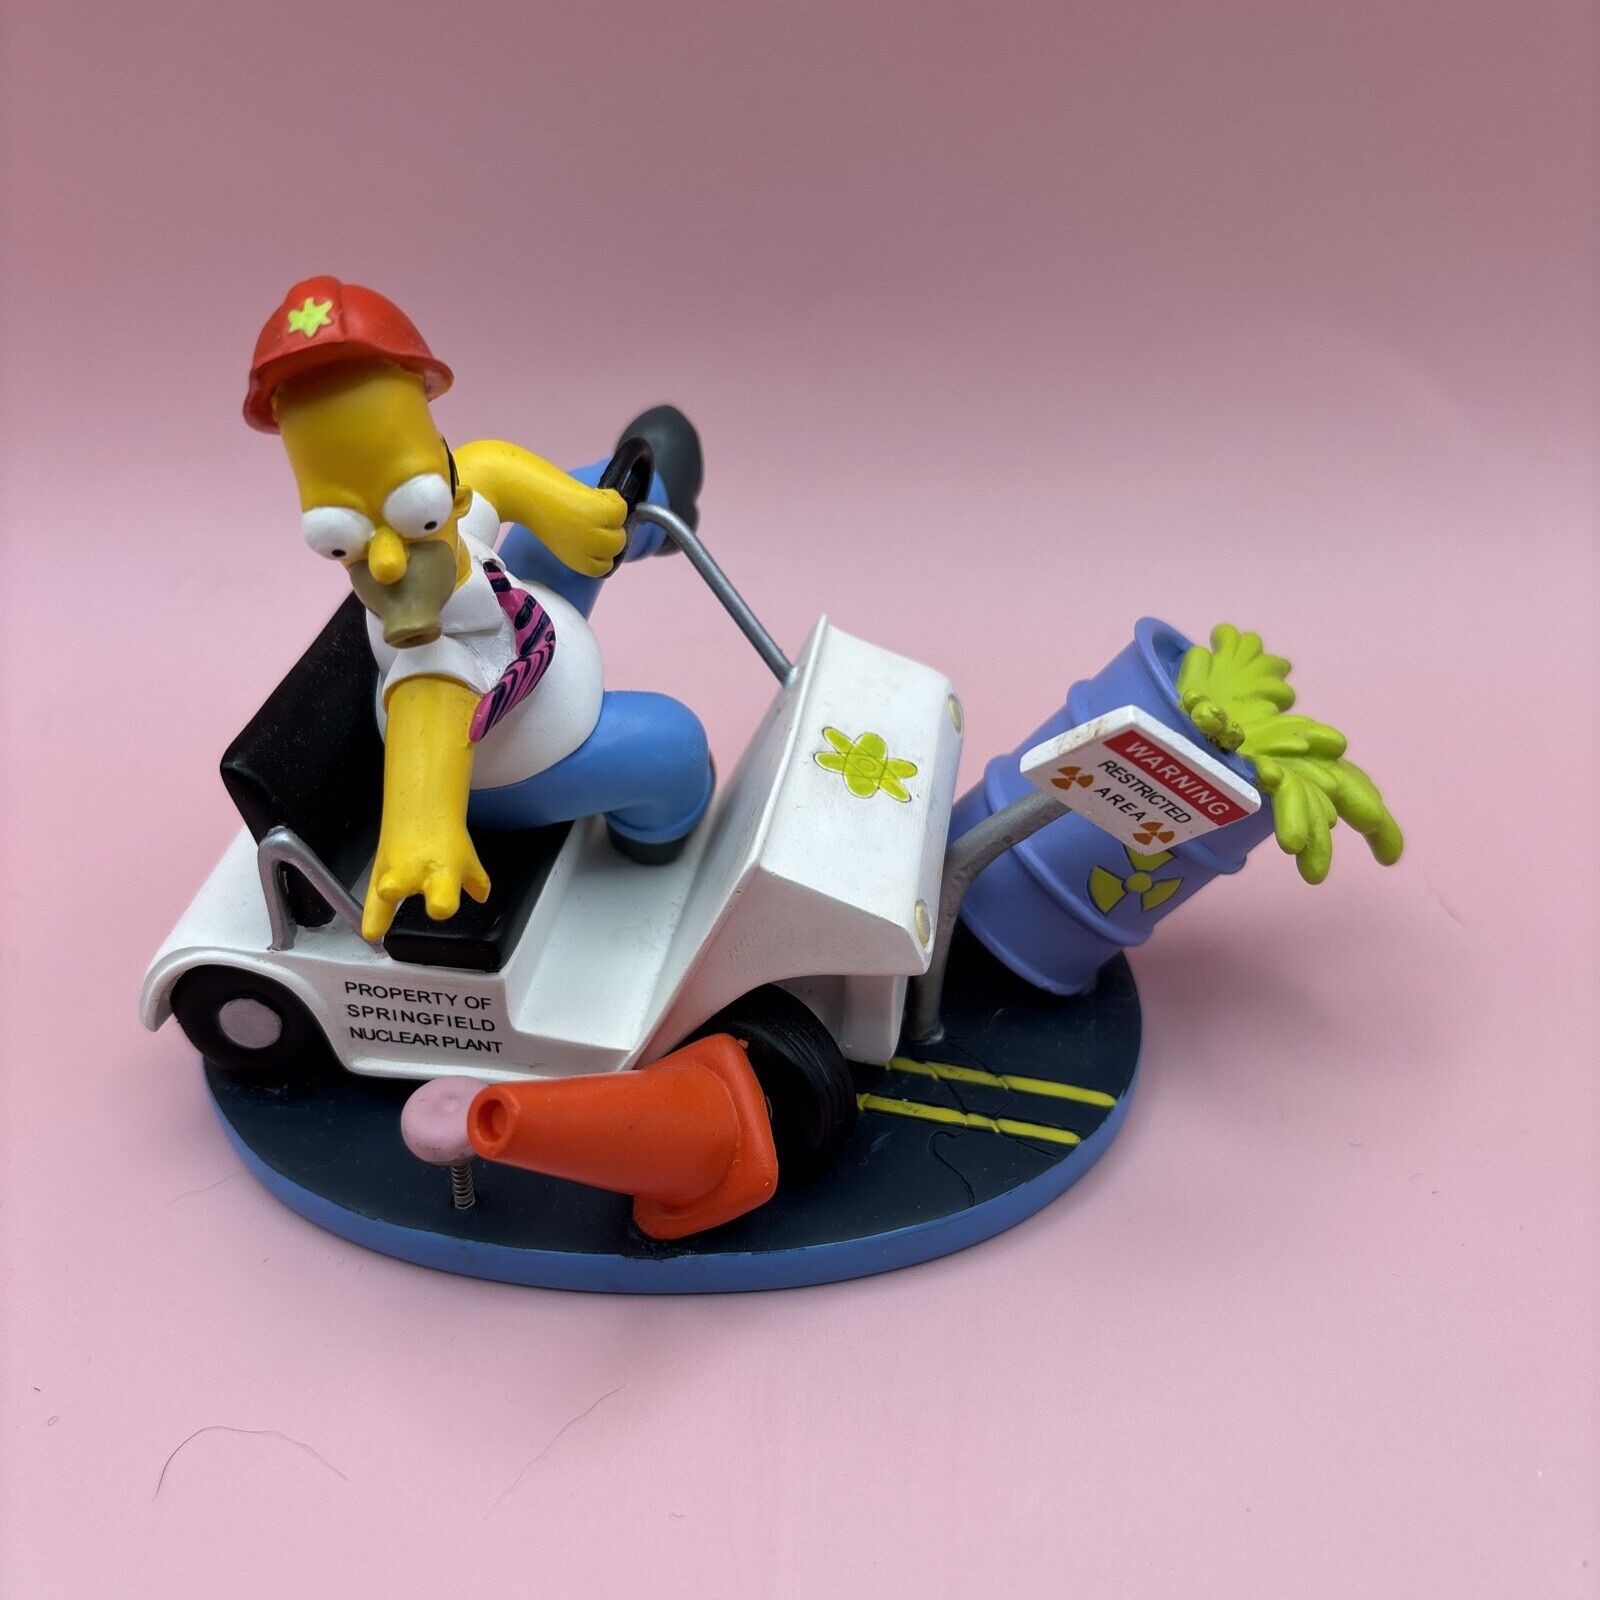 The Simpsons, Misadventures of Homer: “Safety Inspector” Hamilton Collection